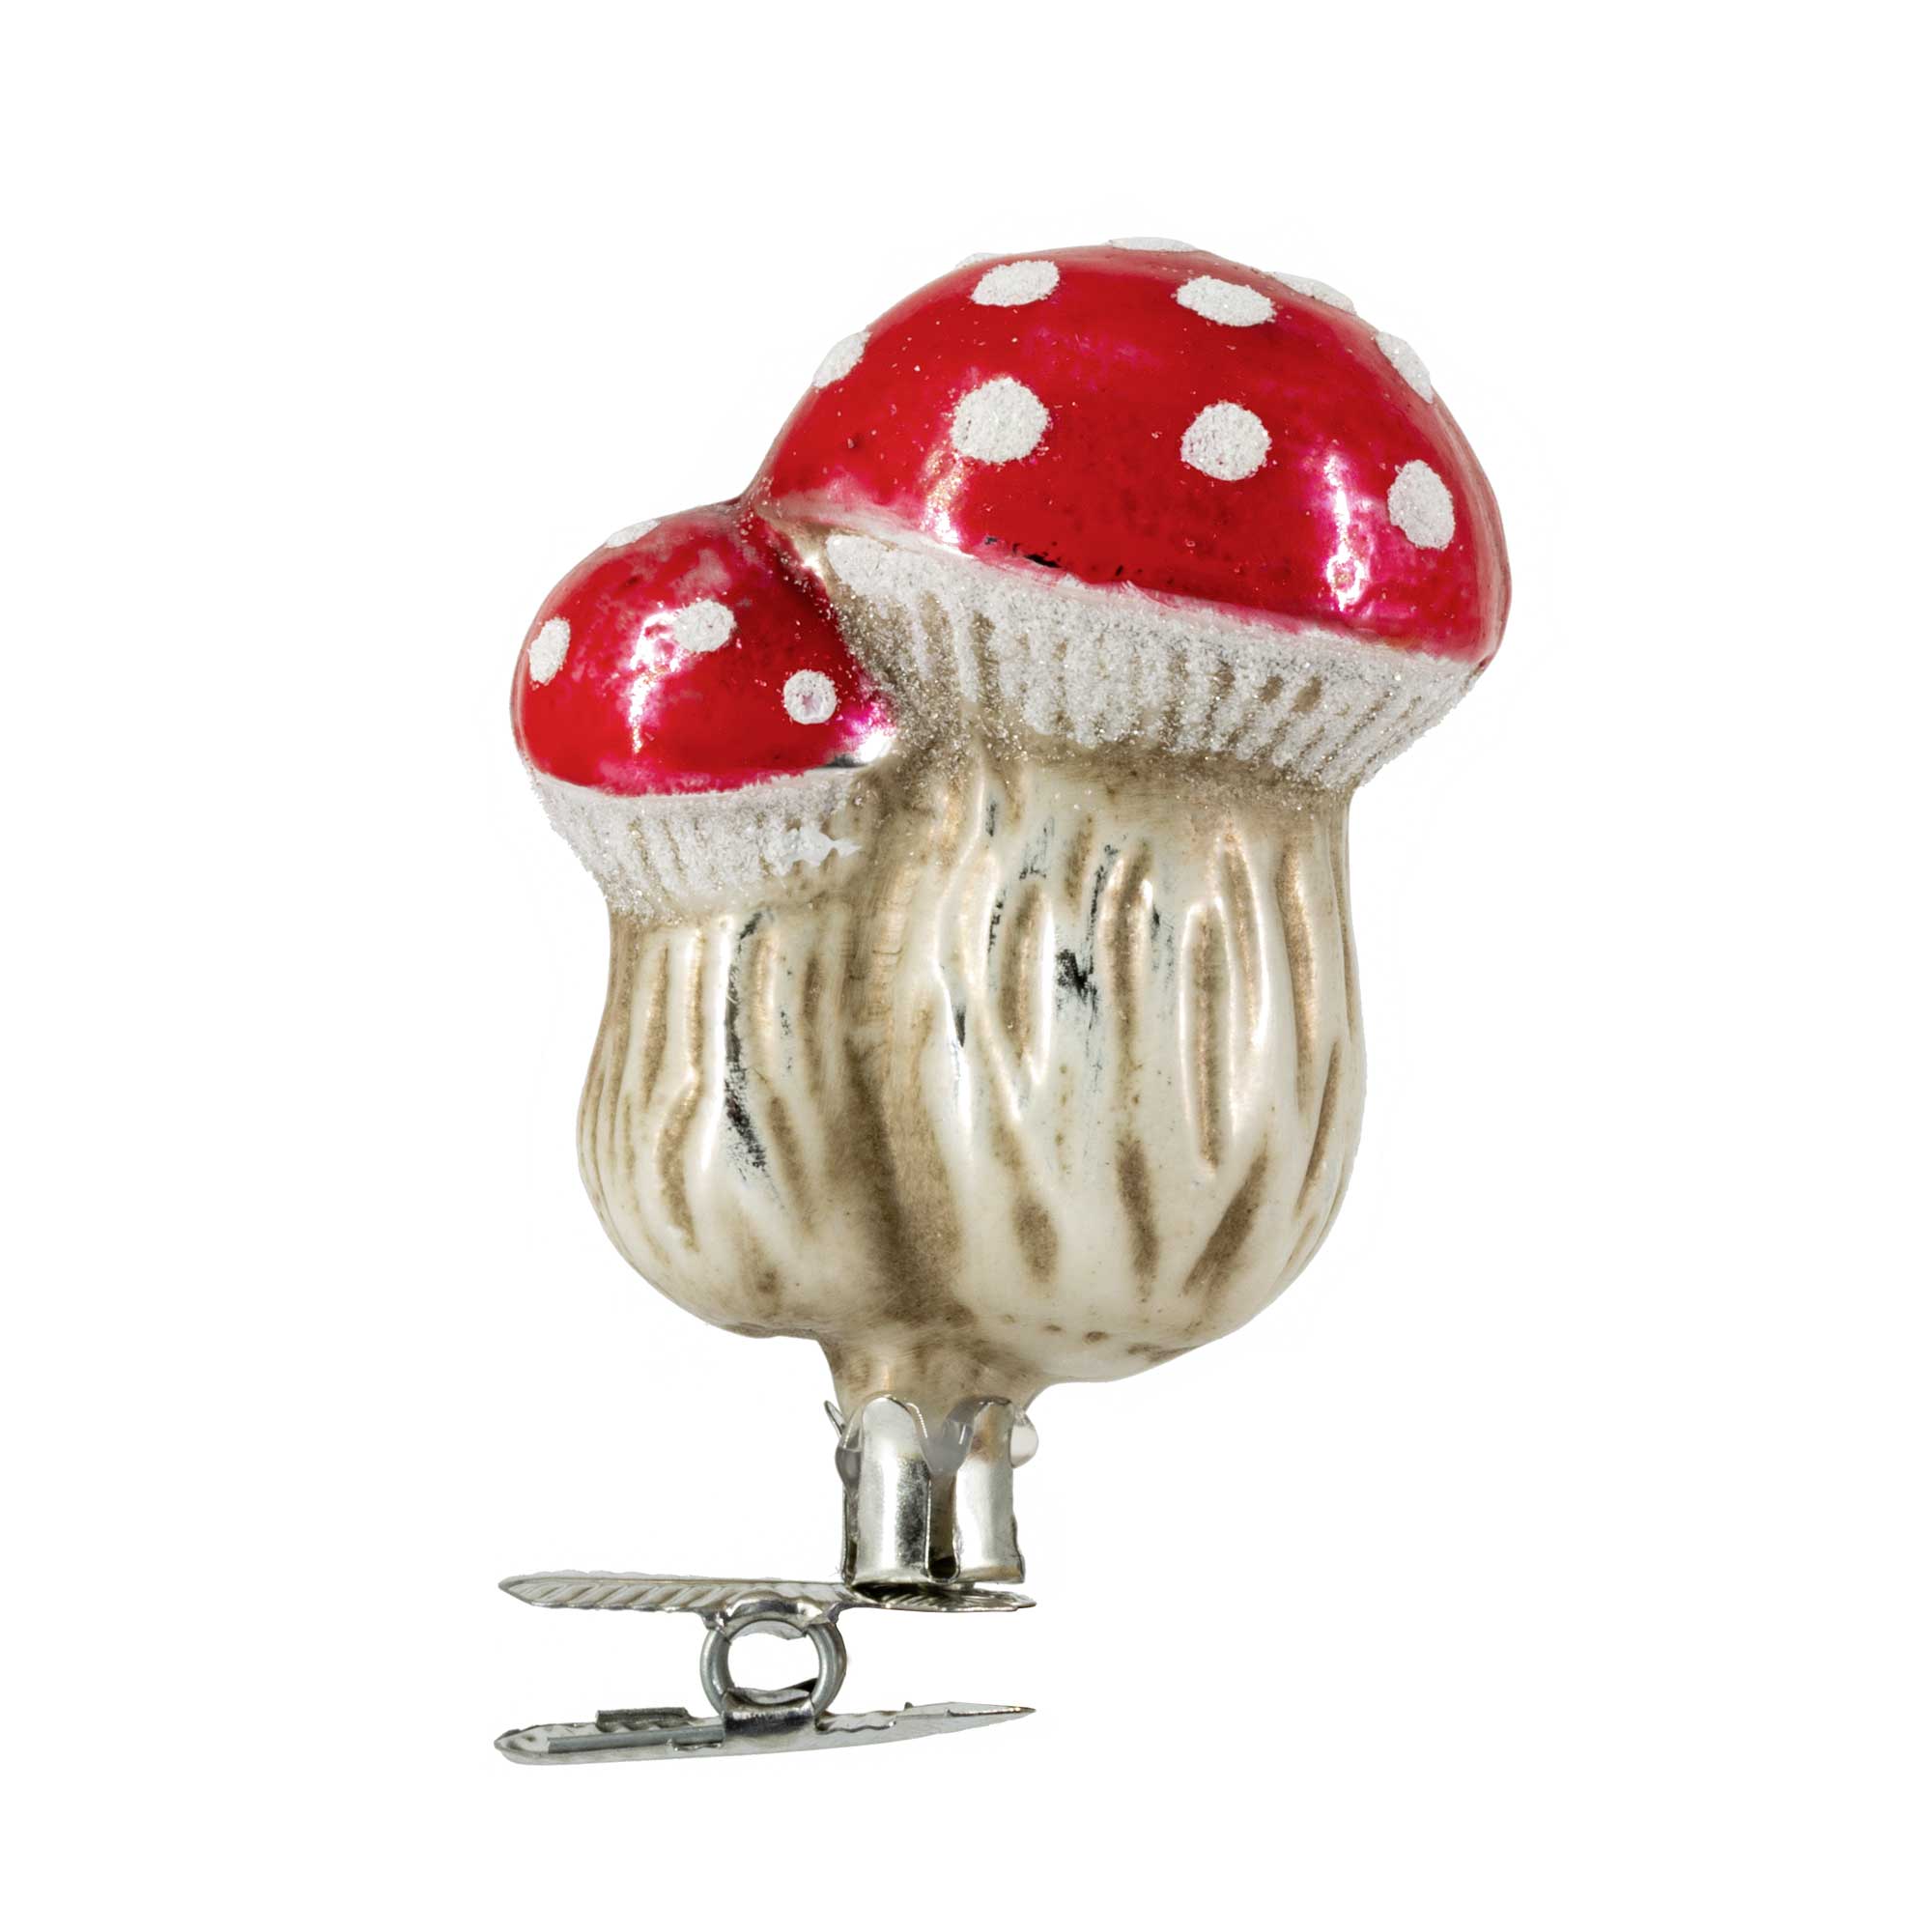 Set of 6 Glass ornaments "Two fly agaric" on clip